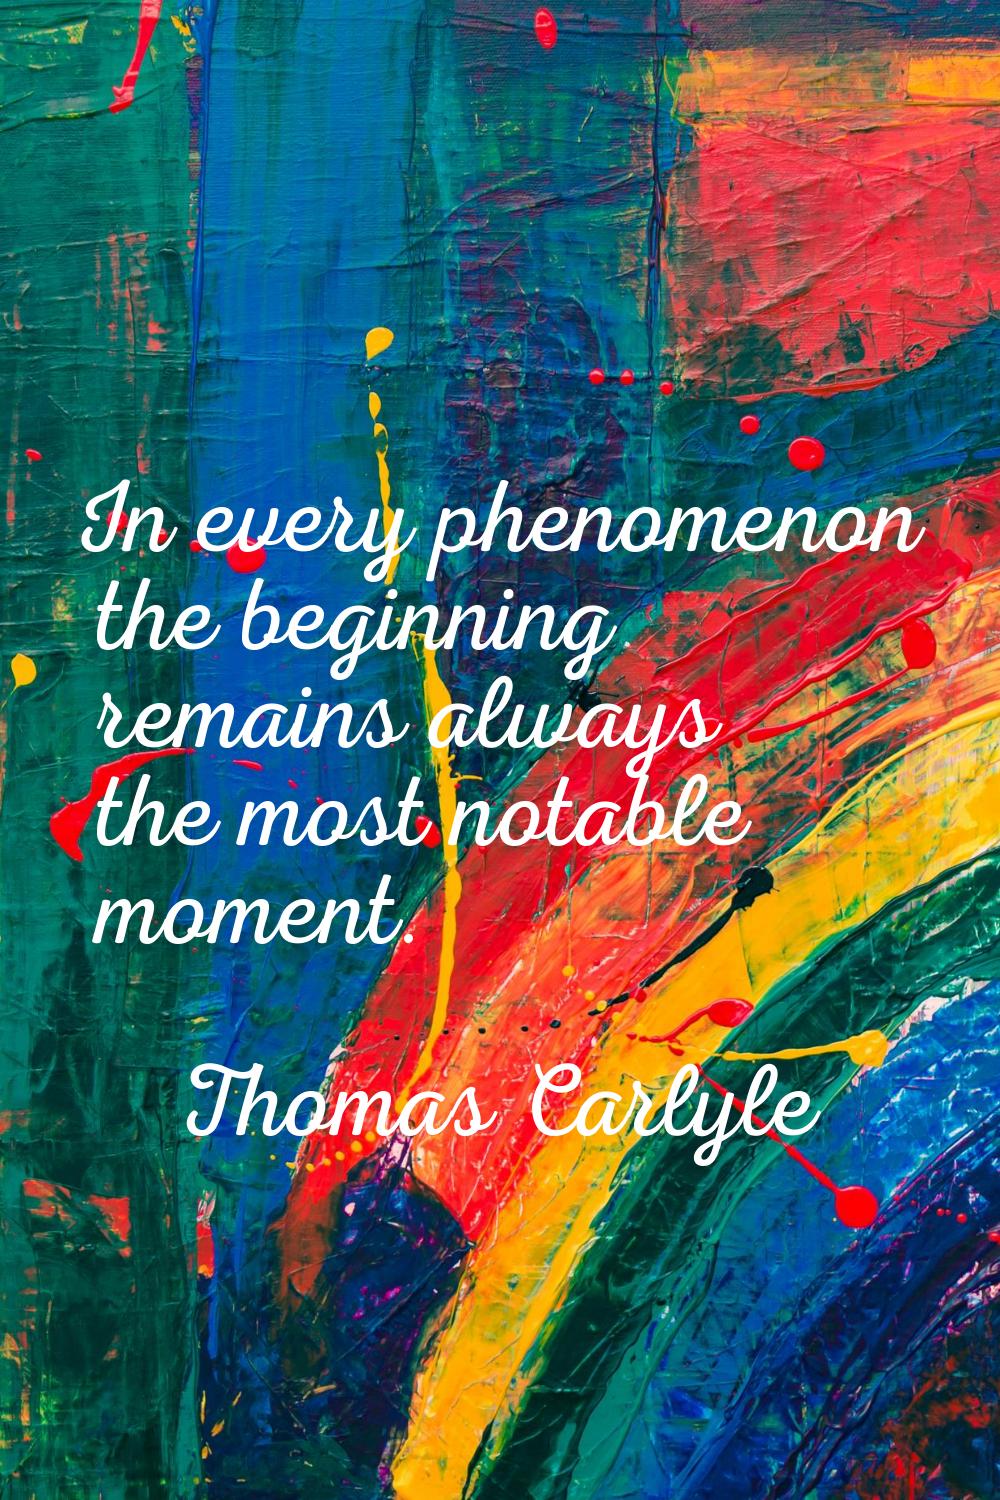 In every phenomenon the beginning remains always the most notable moment.